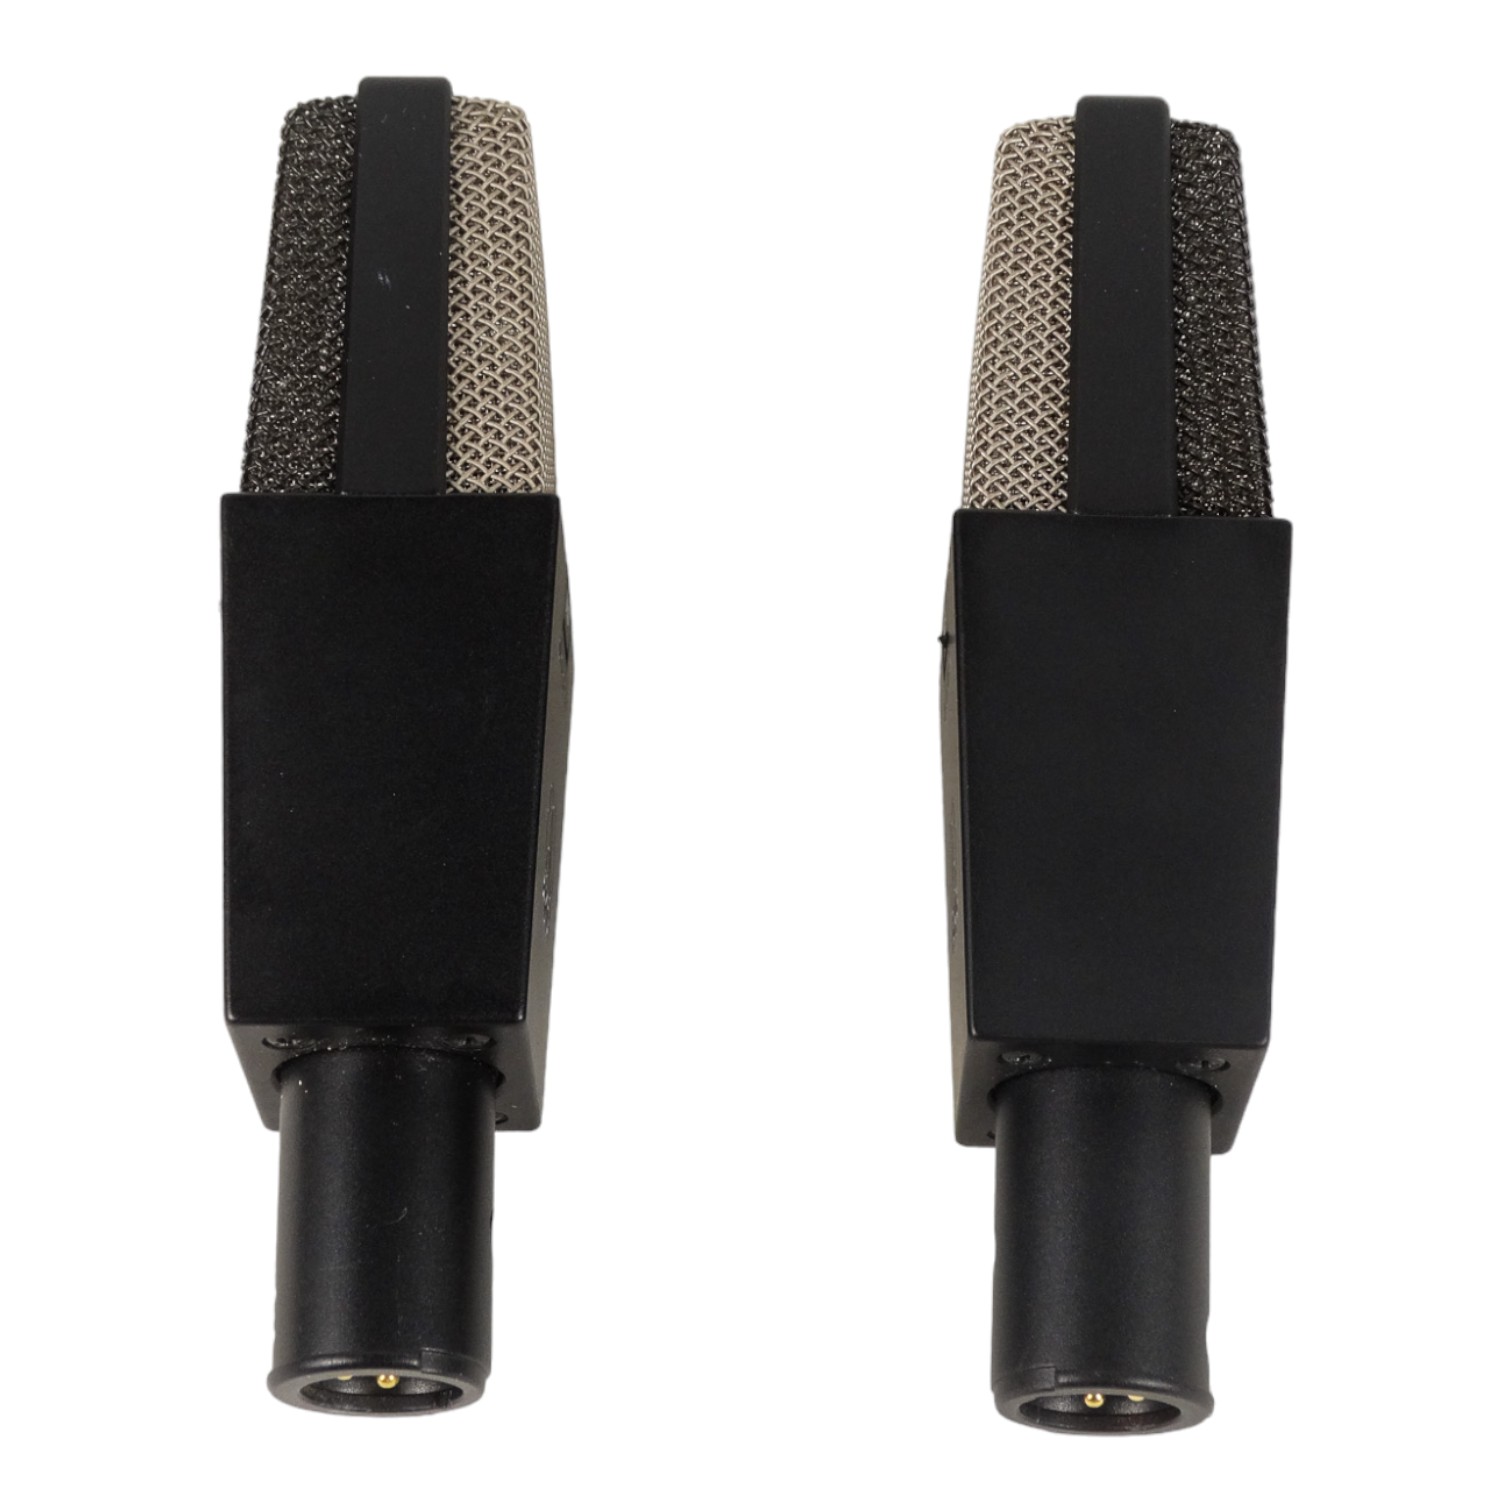 A pair of AKG C414 condenser microphones - in a hard plastic case. - Image 4 of 6